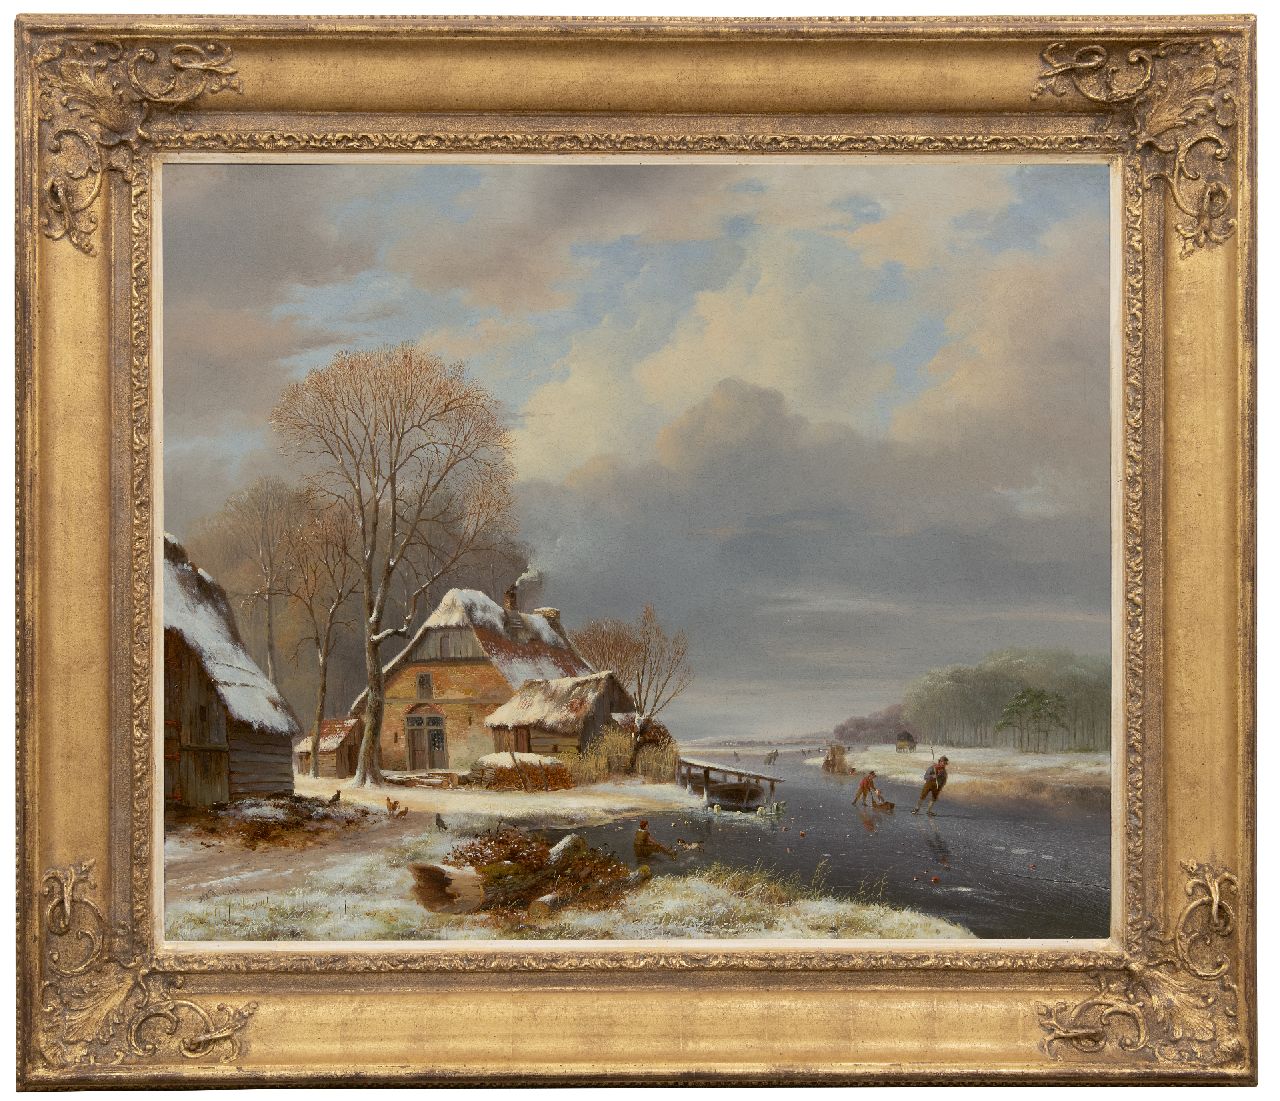 Roosenboom N.J.  | Nicolaas Johannes Roosenboom | Paintings offered for sale | A frozen river with skaters near a farm, oil on canvas 71.2 x 87.7 cm, signed l.l.